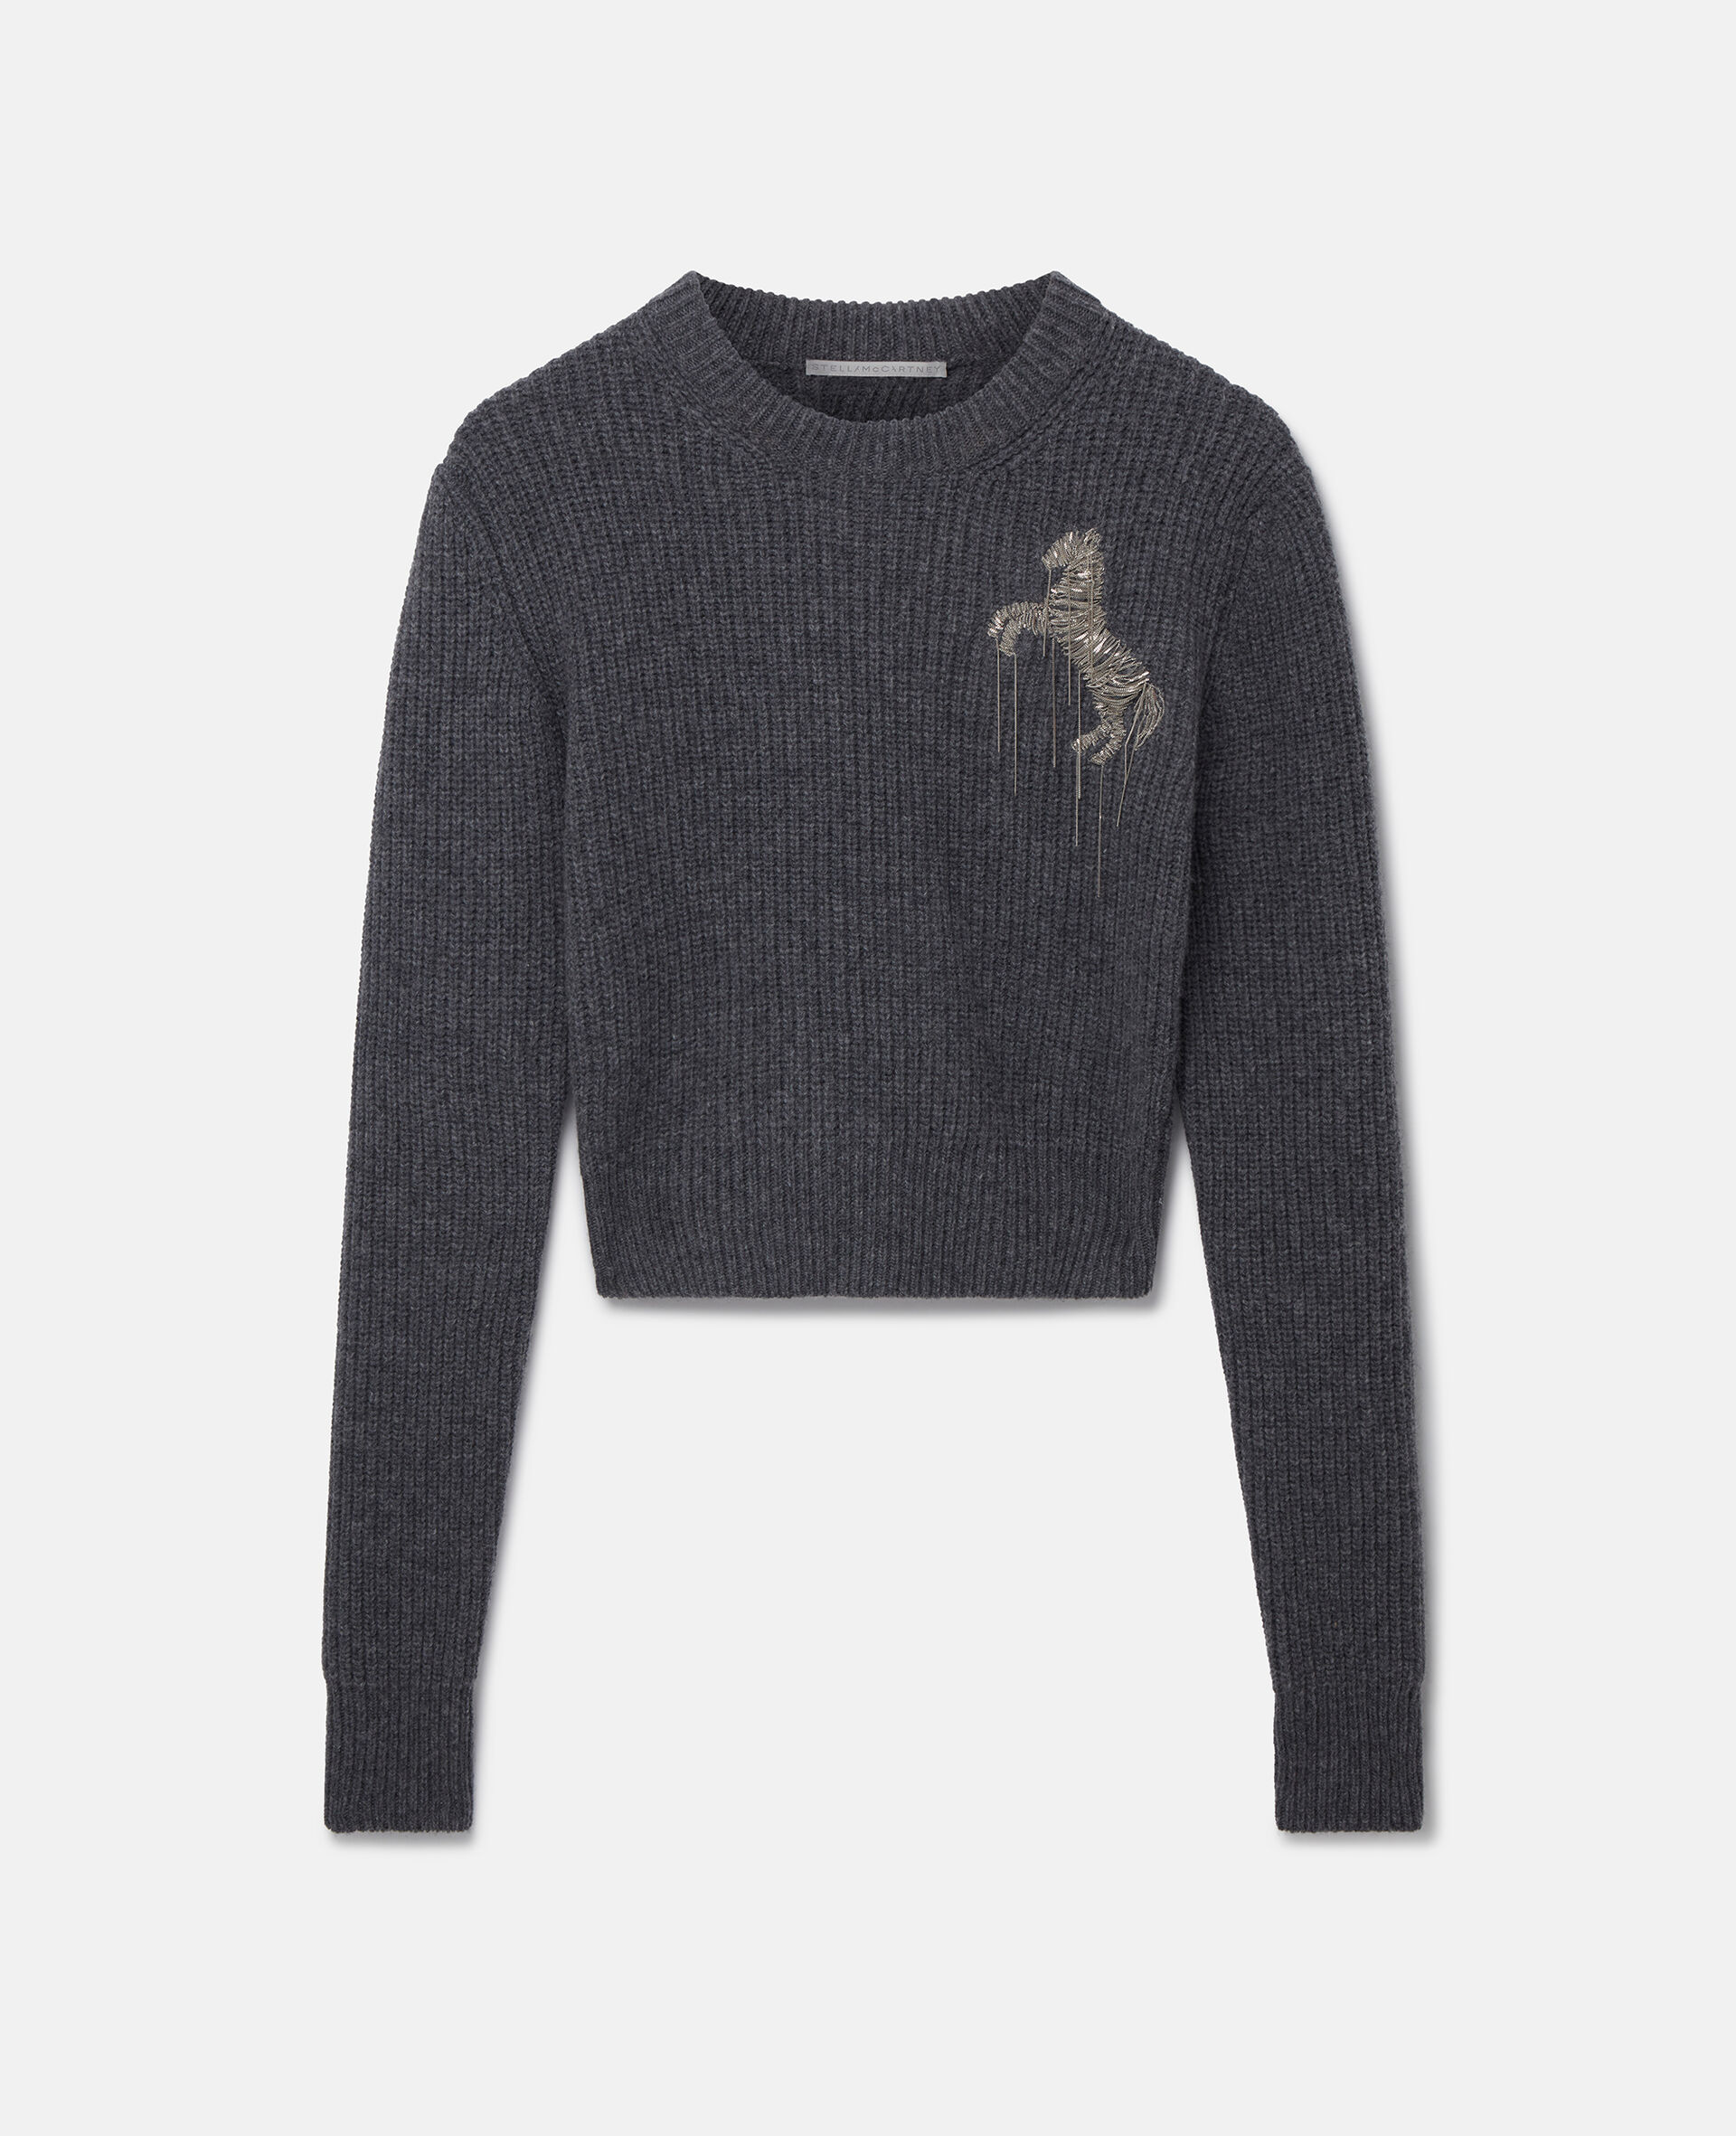 Stella's Embroidered Crewneck Sweatshirt Black with Cream Embroidery – Our  Life by Stella's